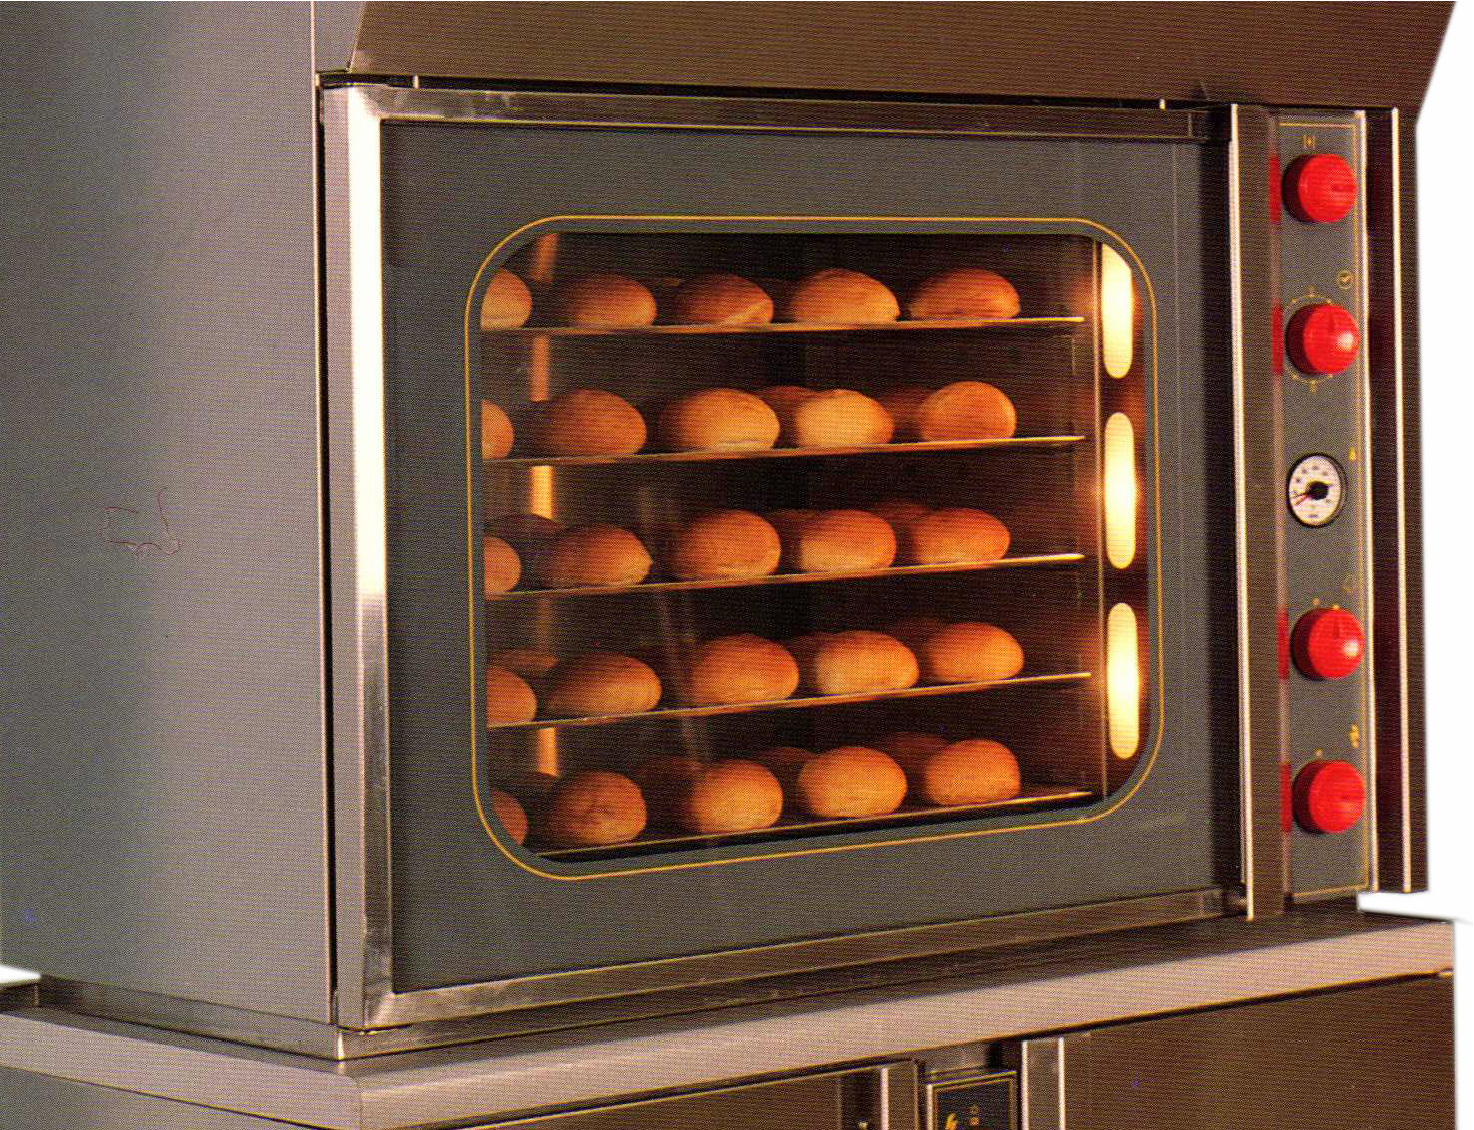 First Convection Oven